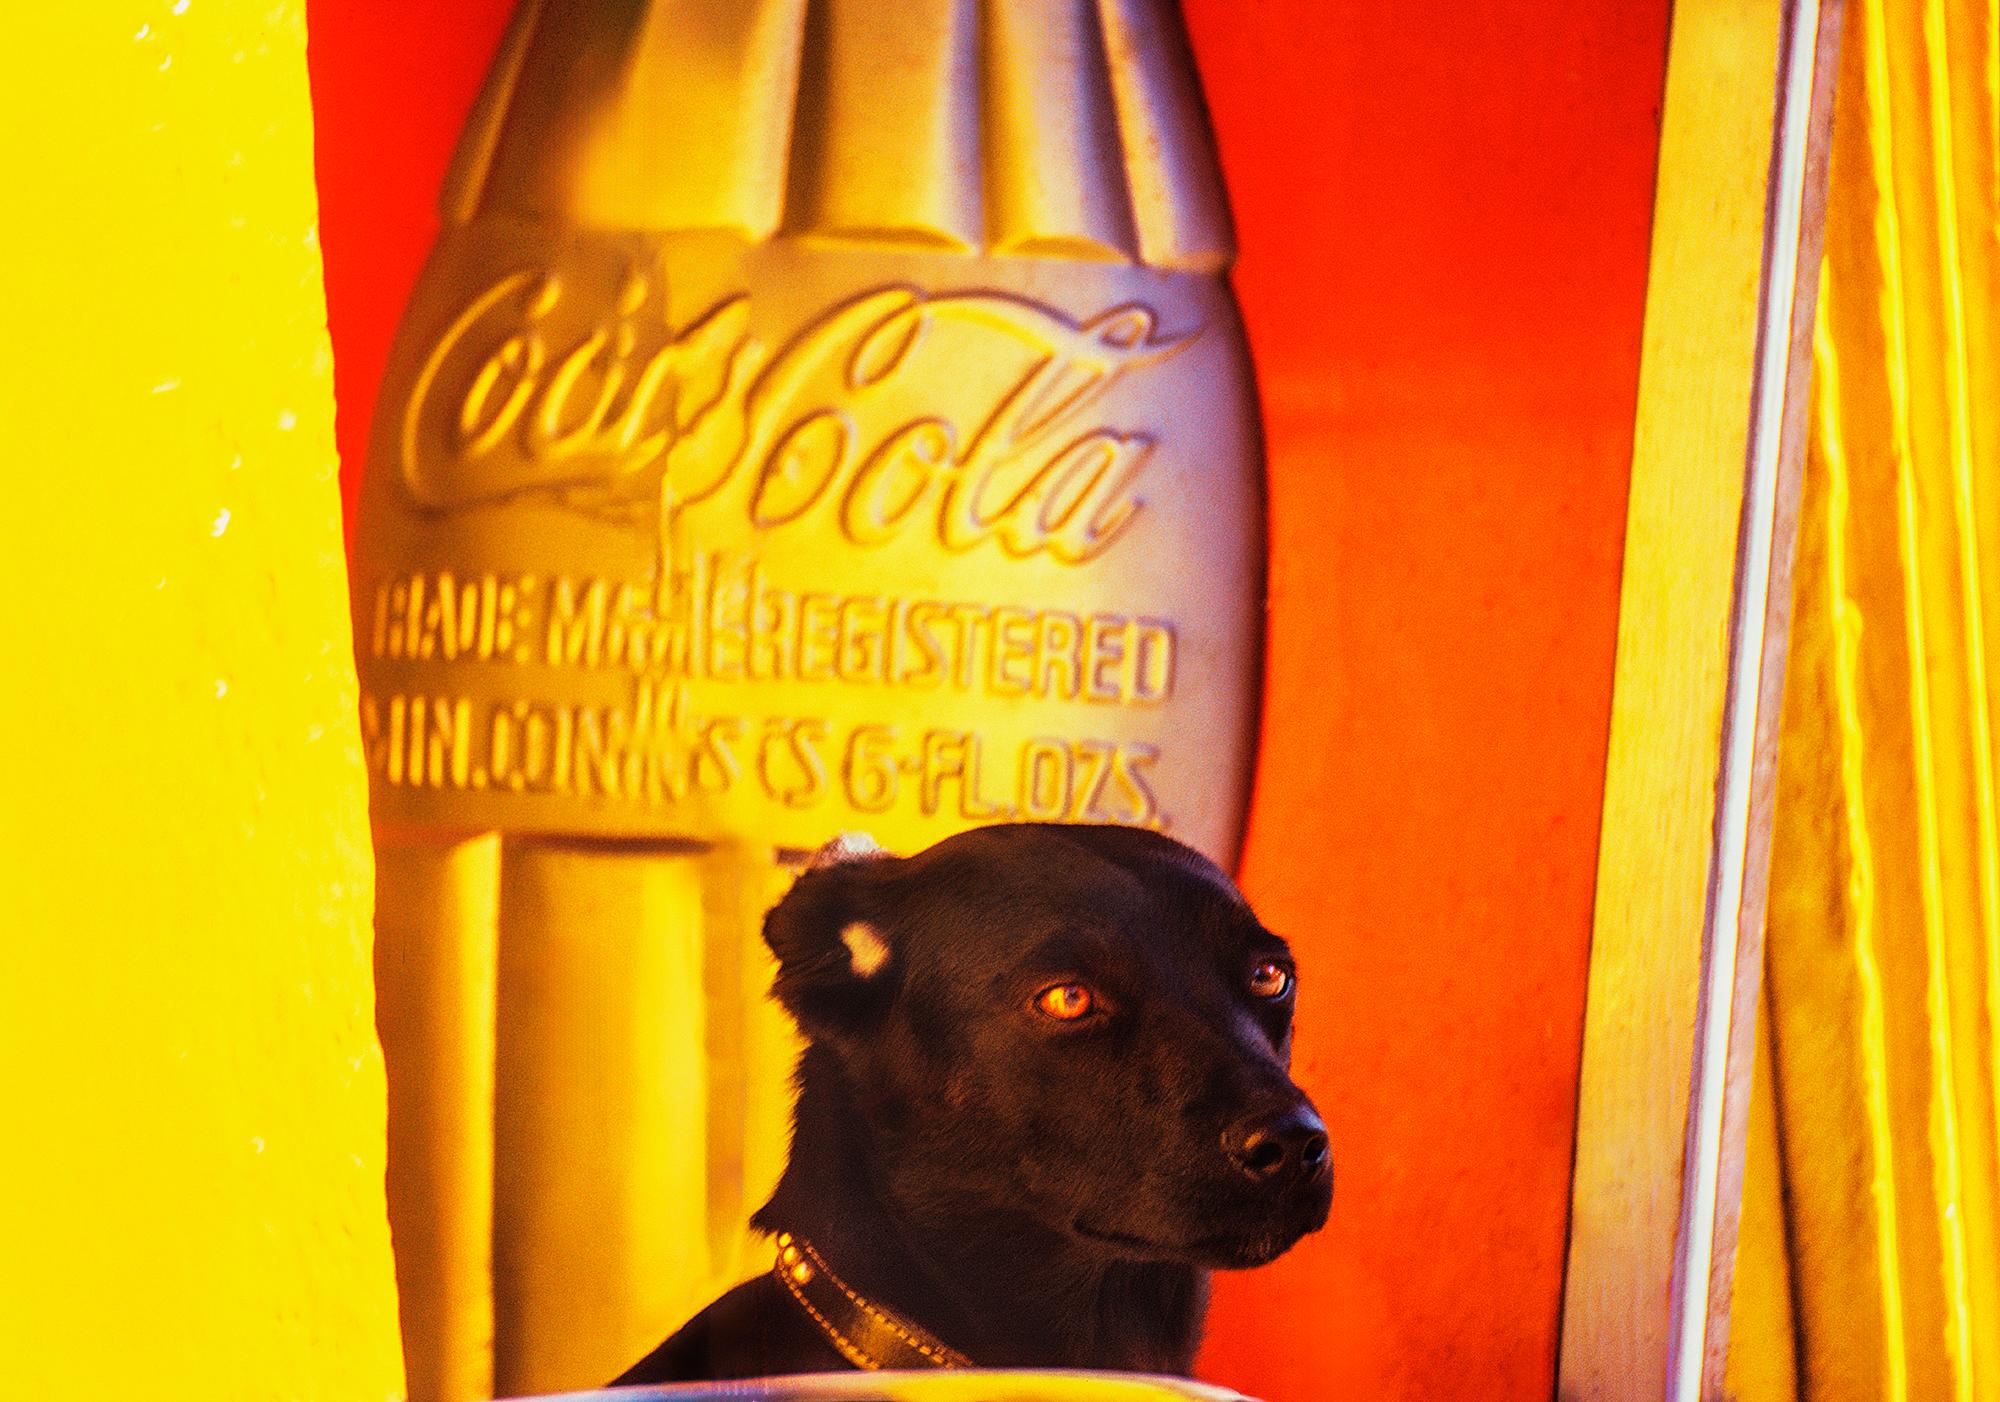 Mitchell Funk Color Photograph - Cute Black Dog Against a Graphic Yellow Orange Wall in Mexico